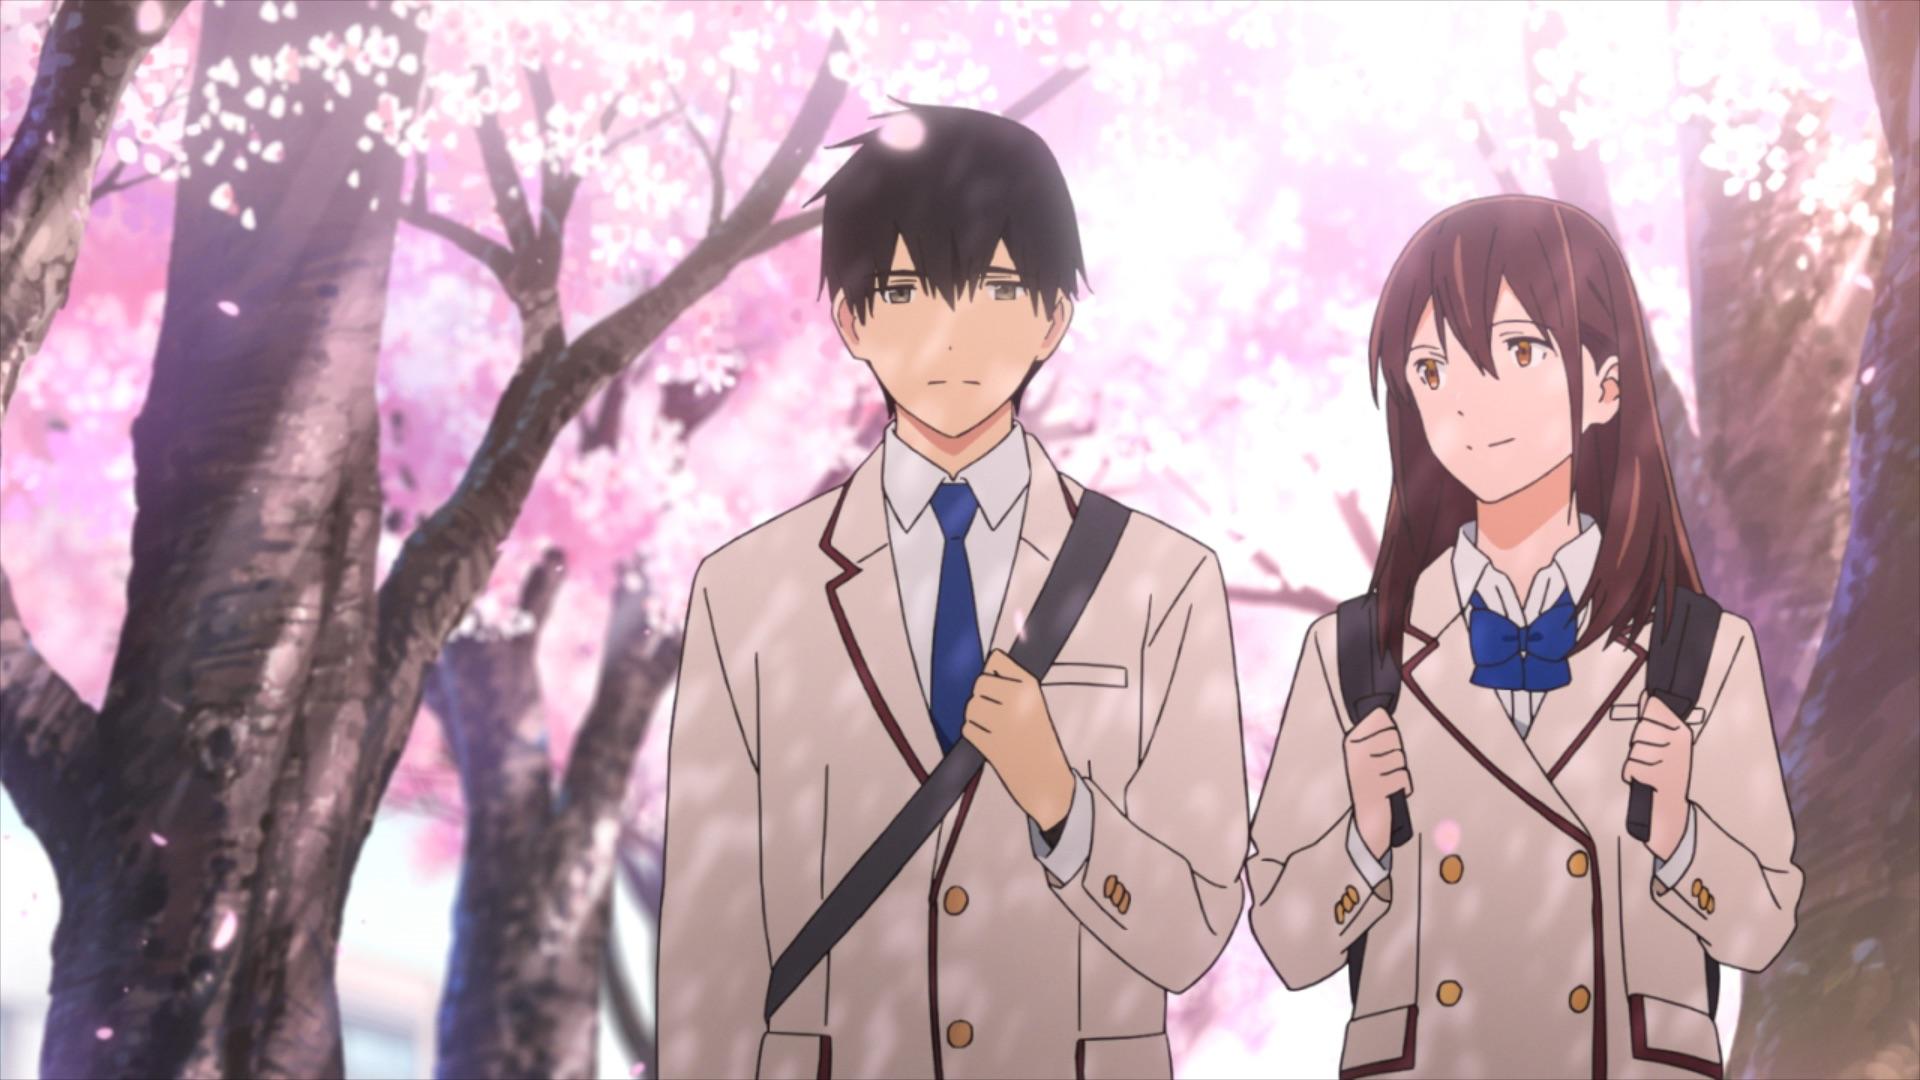 Emotional Anime Film I want to eat your pancreas Debuts in U.S. Theaters